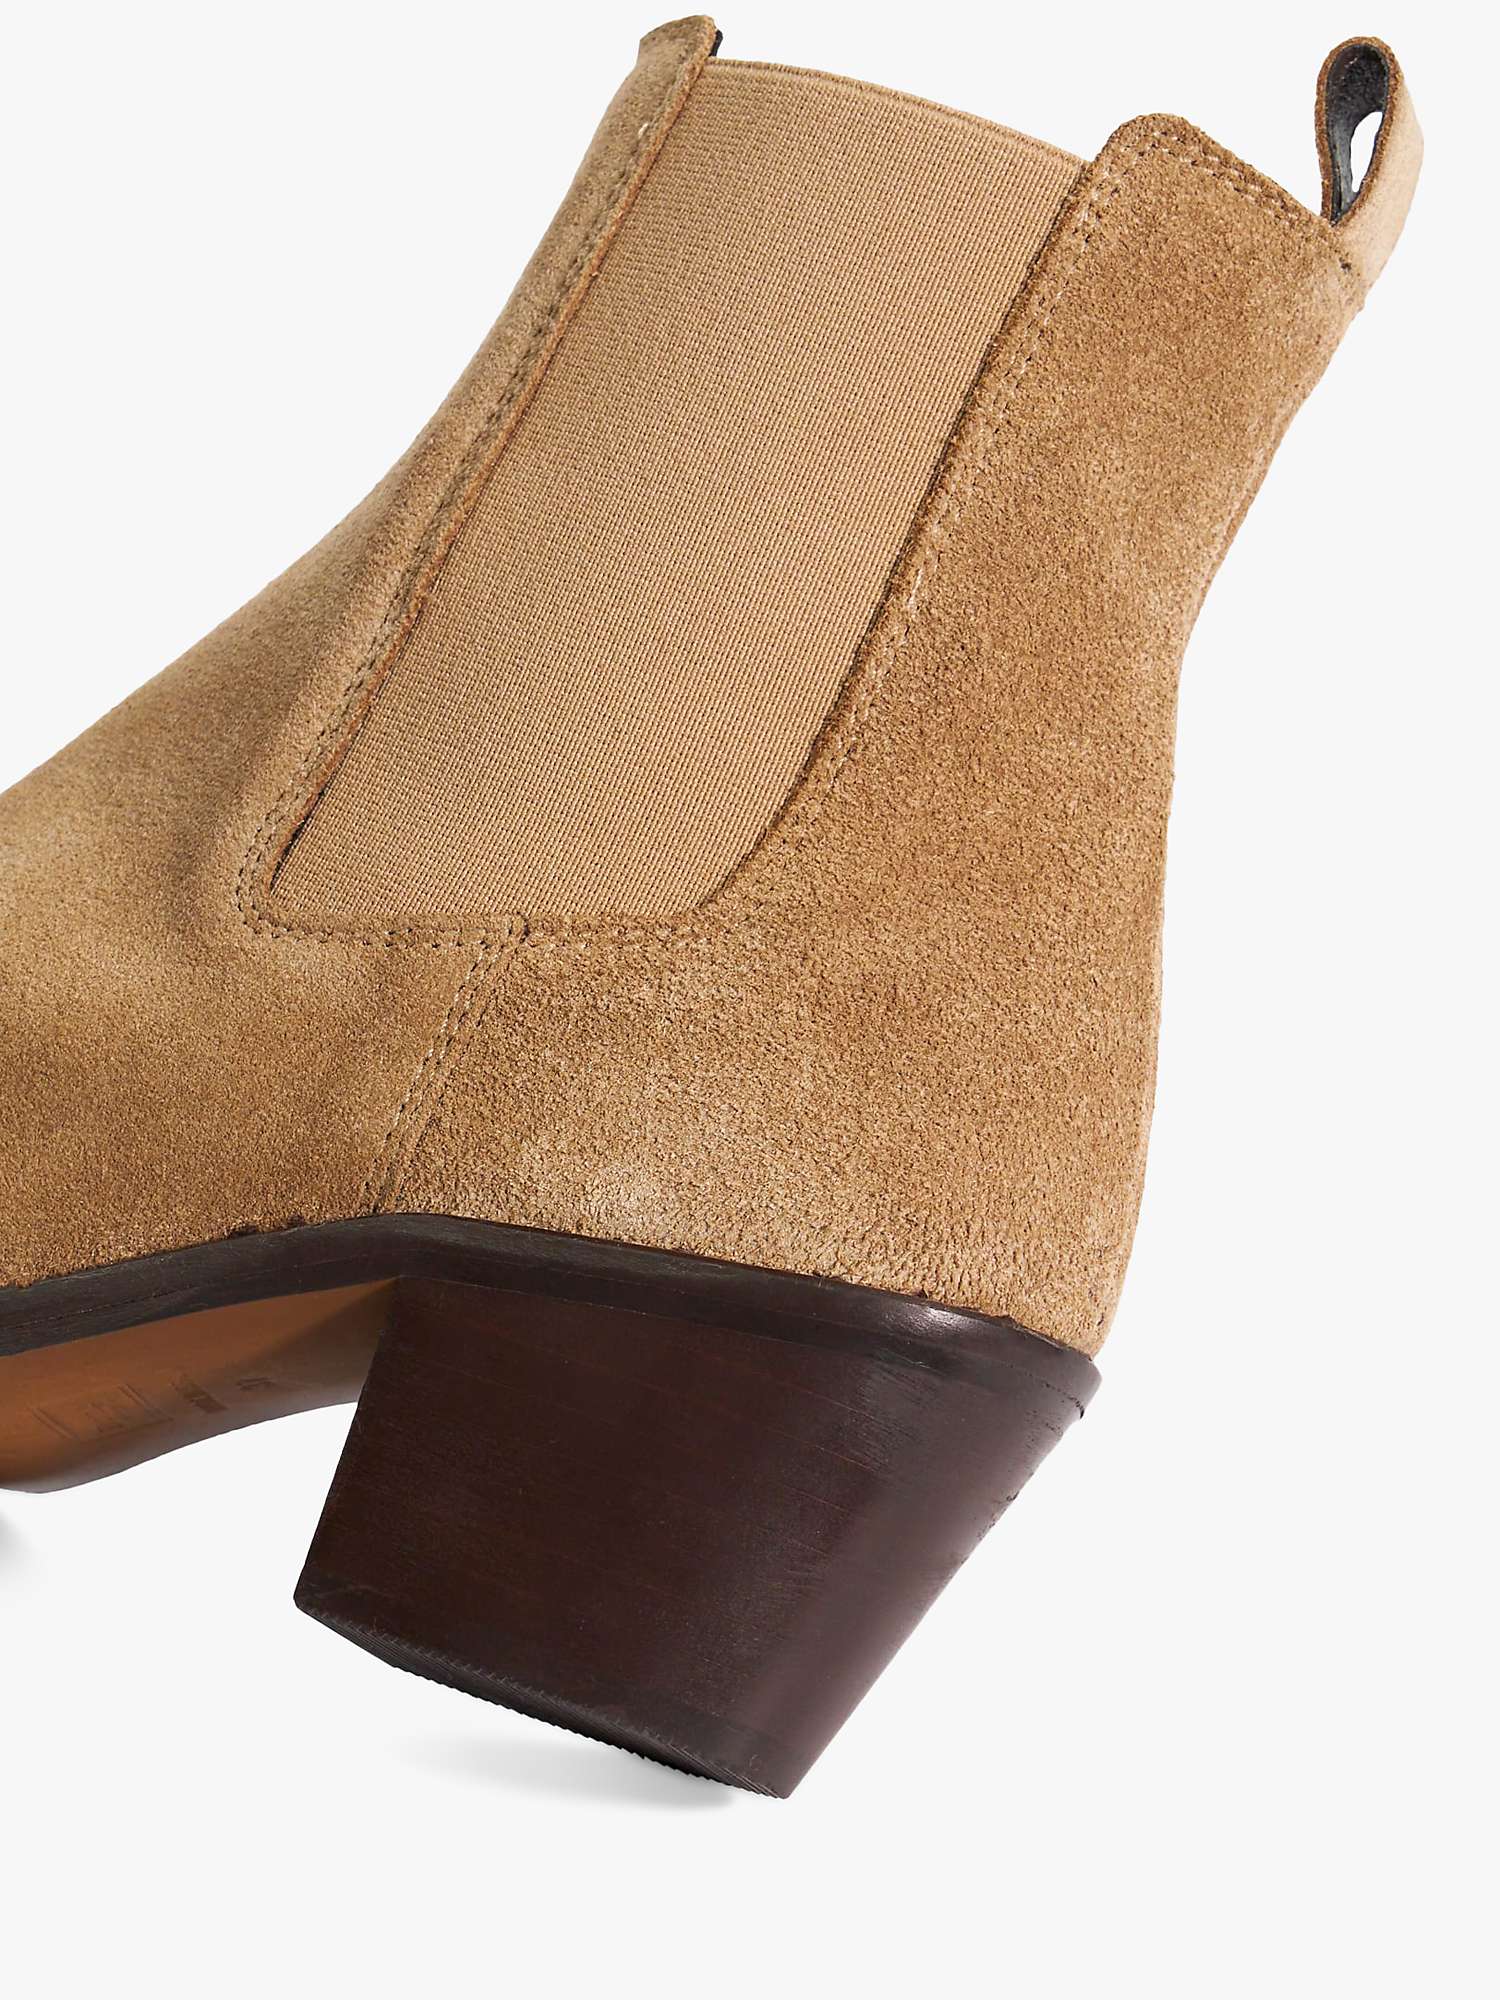 Buy Dune Pexas Suede Chelsea Boots, Sand Online at johnlewis.com